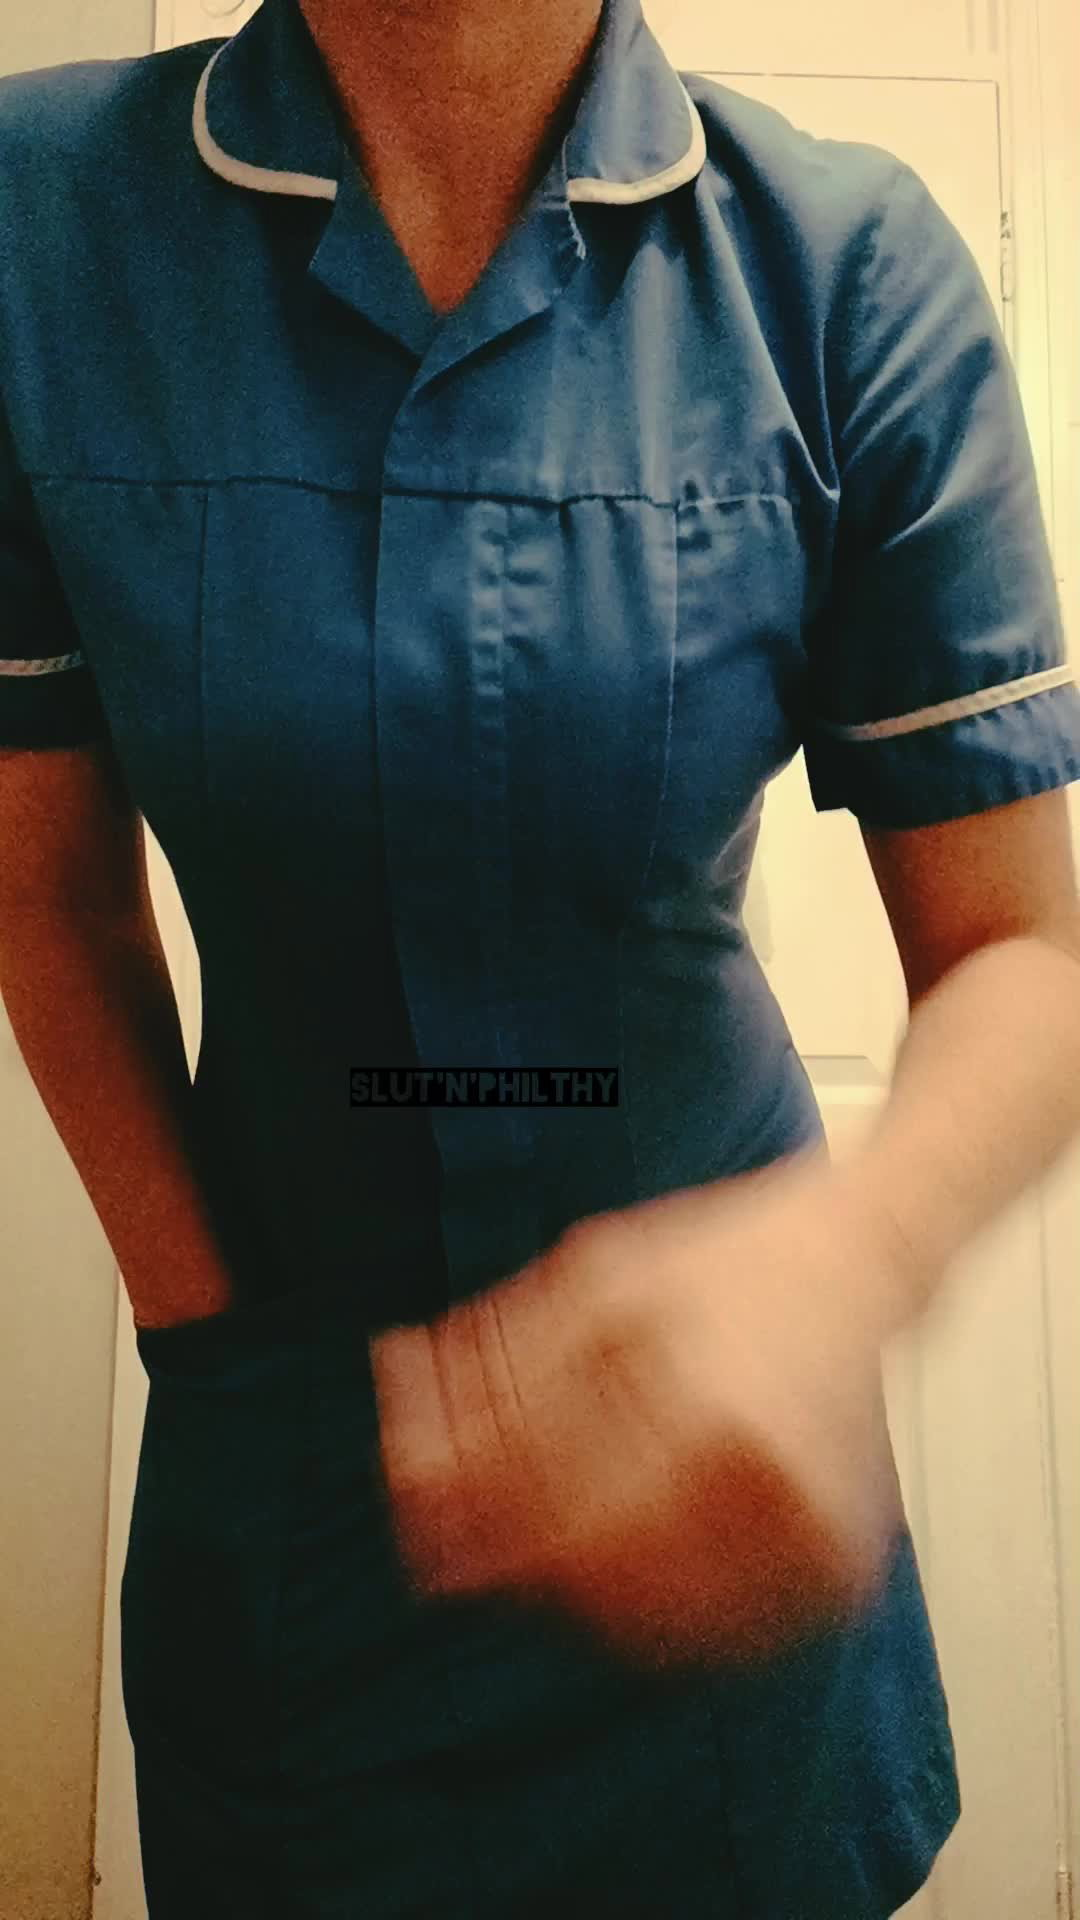 Video by Slut & Philthy with the username @SlutnPhilthy, who is a verified user,  May 8, 2022 at 10:00 PM. The post is about the topic Real naked nurses and the text says 'After a Hard days...Night...

Goodnight sharesome 😽'